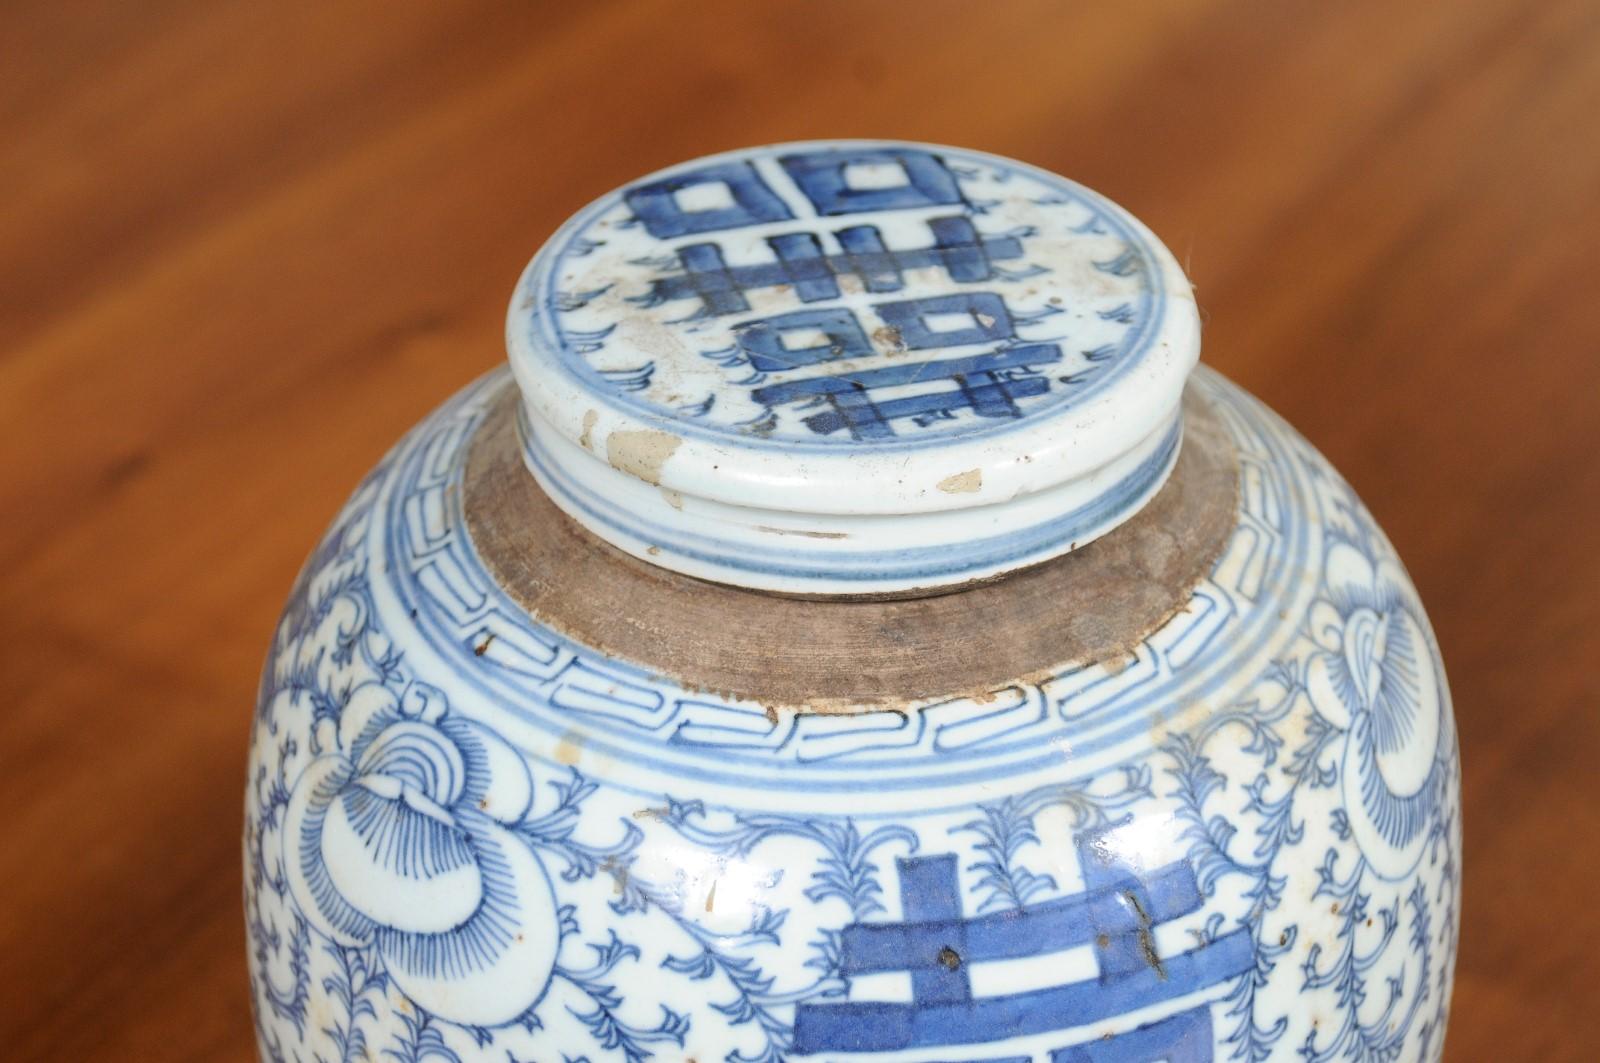 Porcelain Chinese Export Early 20th Century Blue and White Double Happiness Lidded Jar